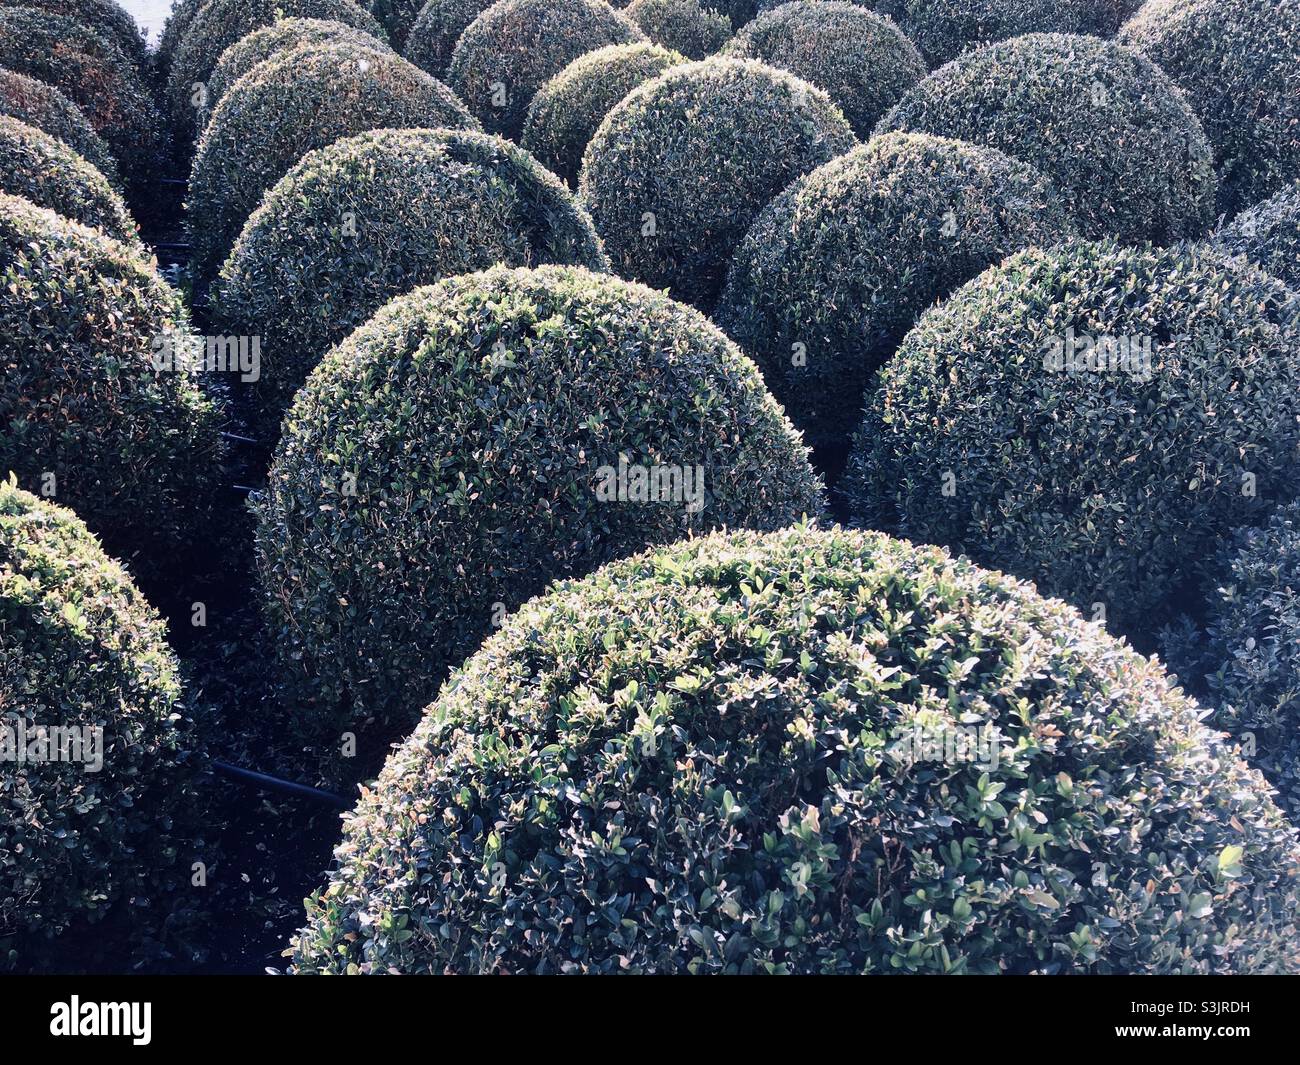 Clipped box plant spheres Buxus sempervirens shrubs Stock Photo